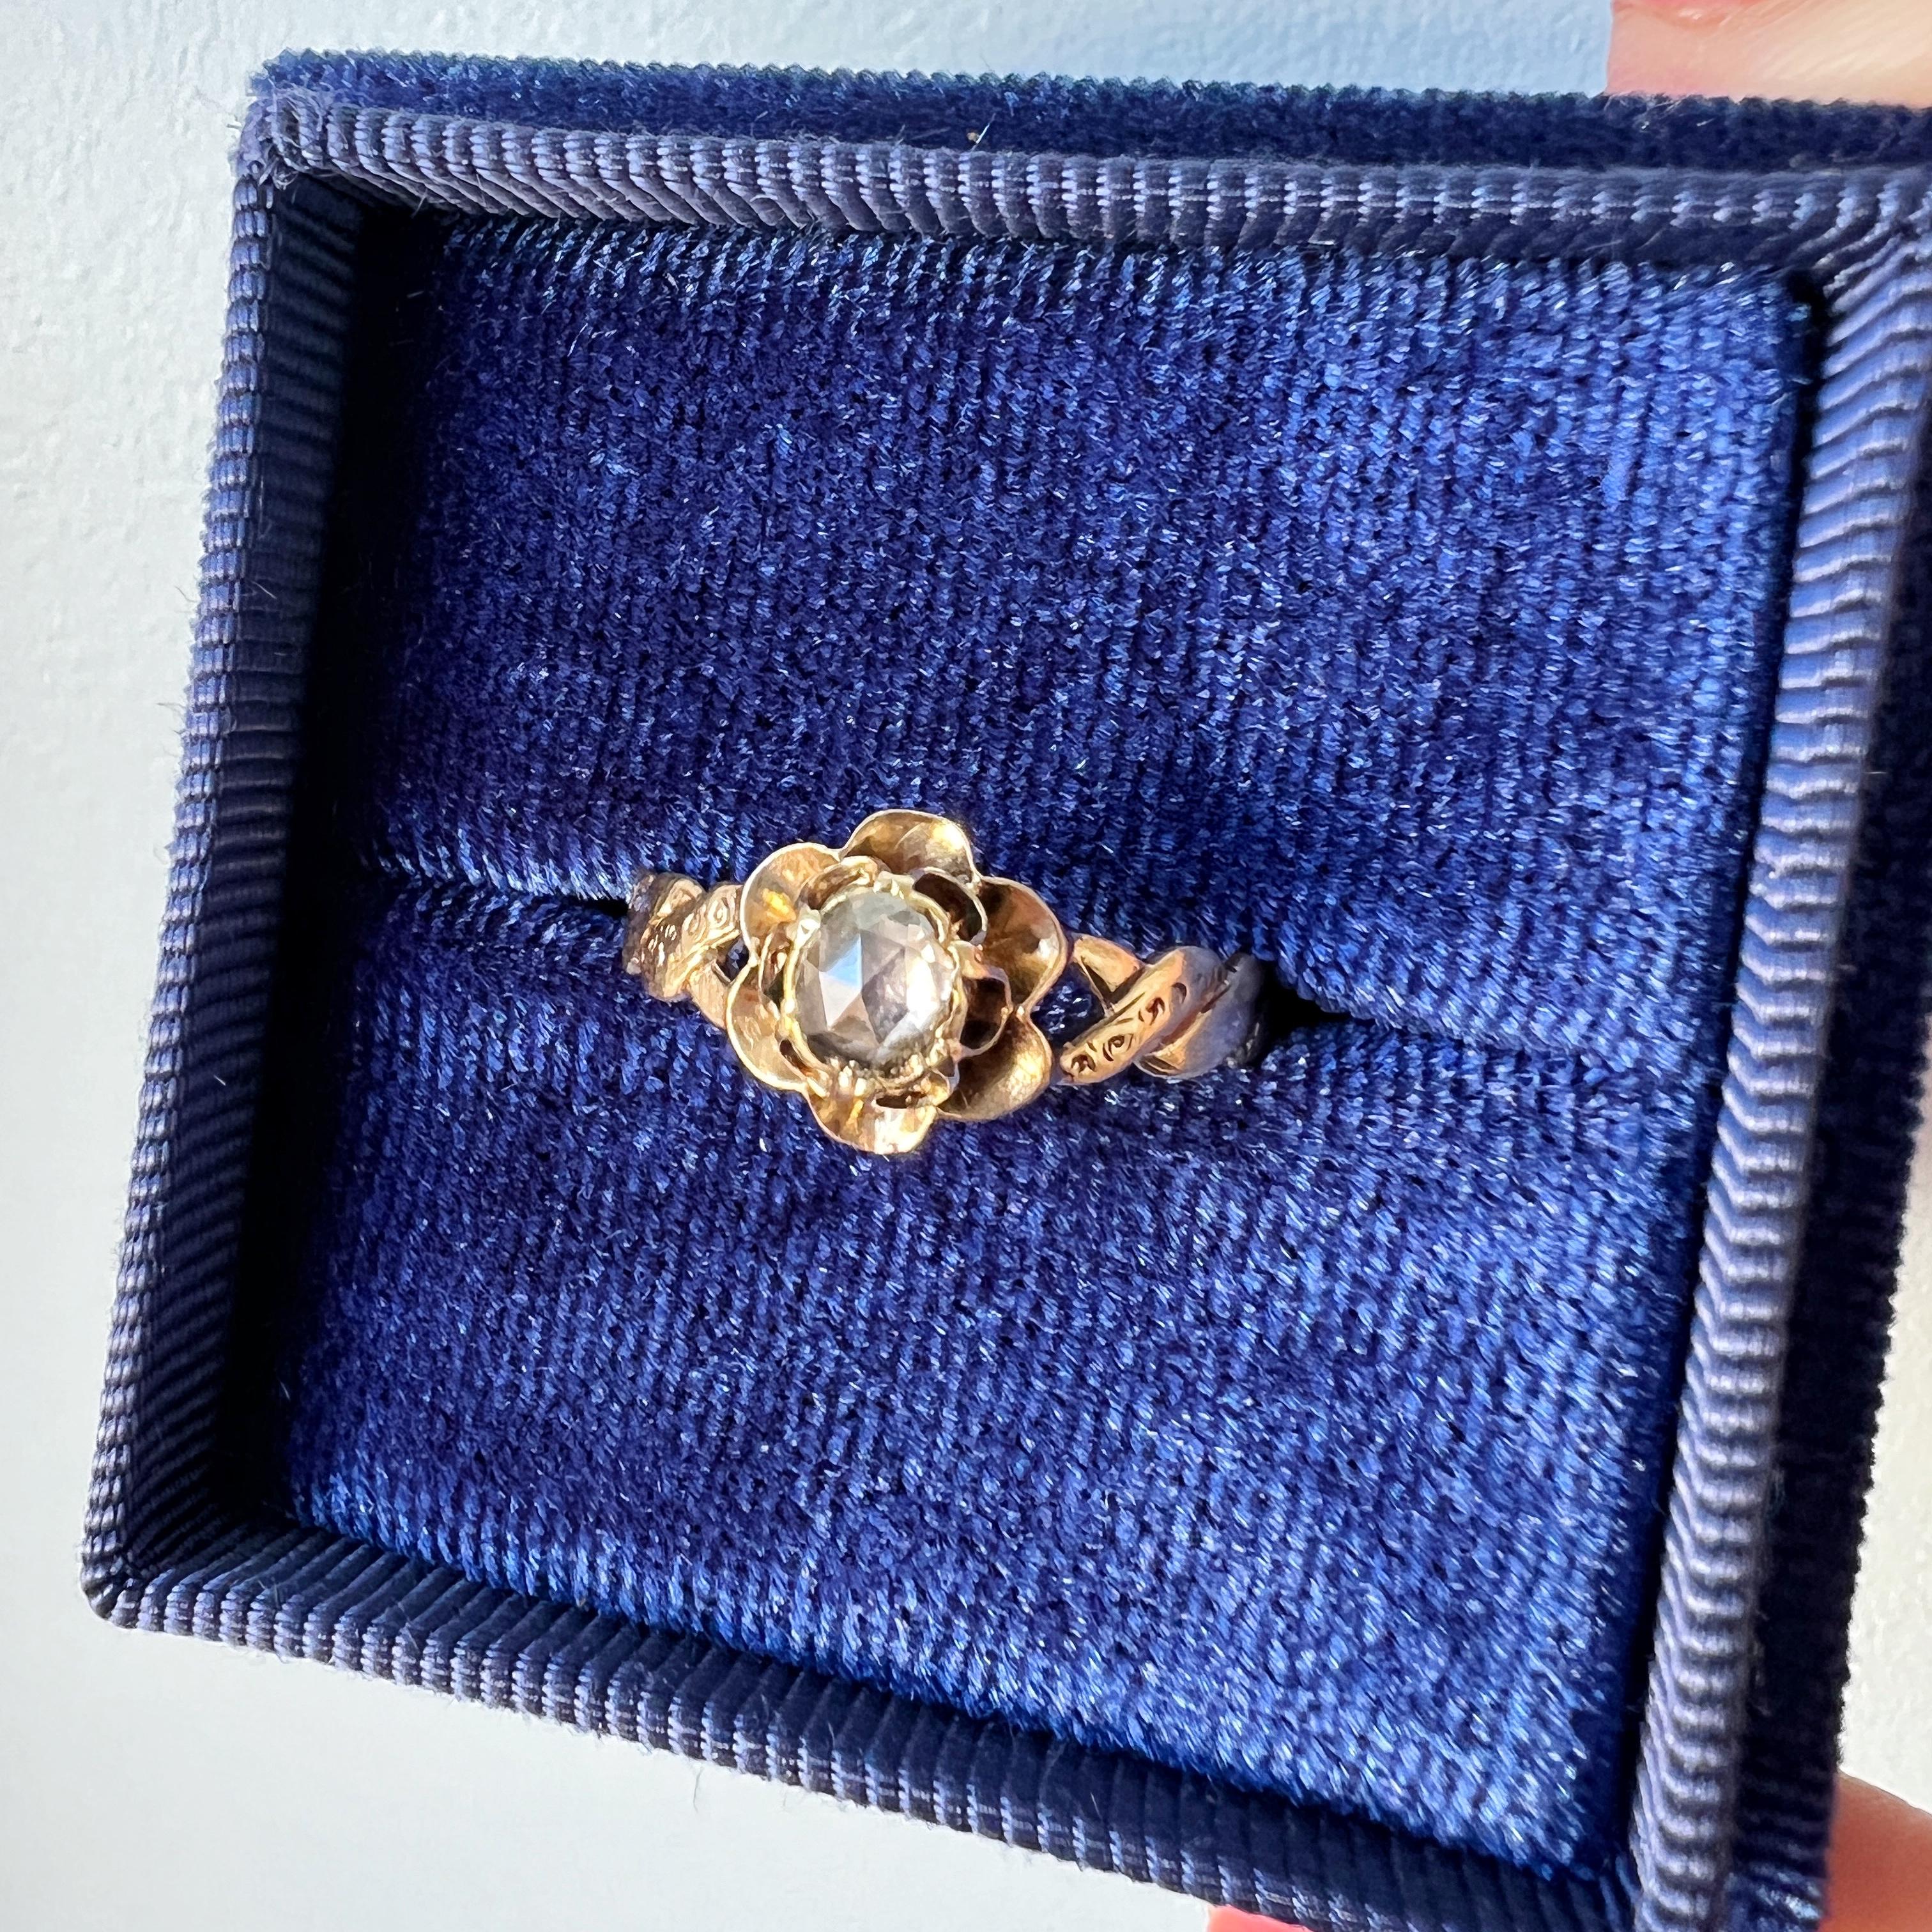 For sale a Victorian era 18K gold rose flower ring – a timeless testament to the romance of a bygone era.

At the heart of this ring lies a radiant rose cut diamond, measuring a dainty 4mm in diameter, with an estimated weight of approximately 0.2